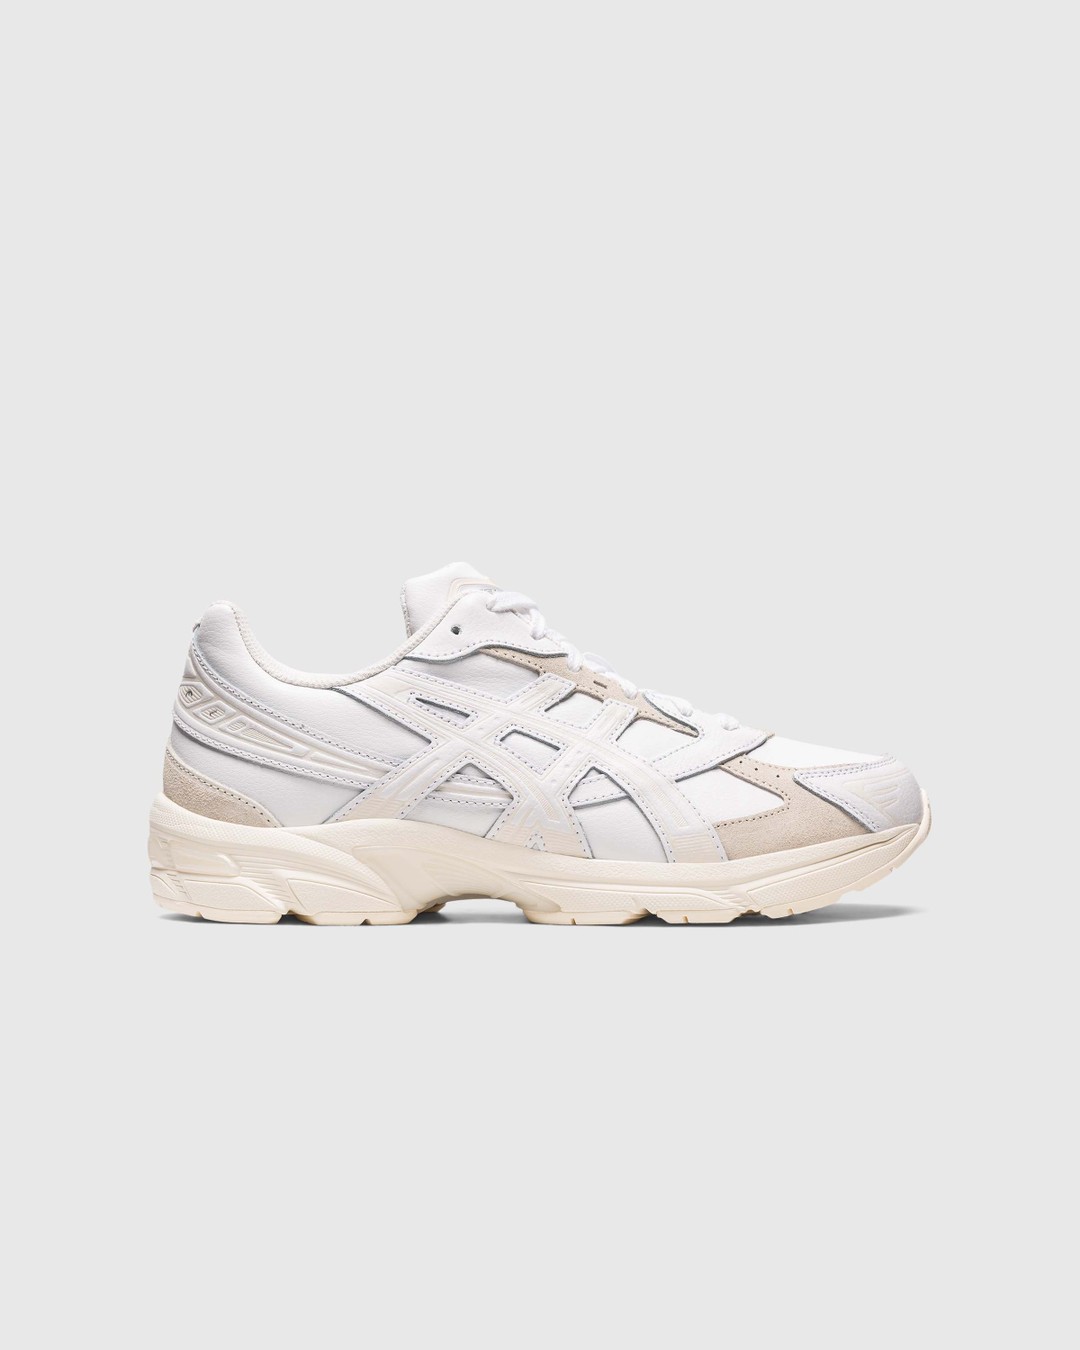 asics – GEL-1130 White - Low Top Sneakers - White - Image 1